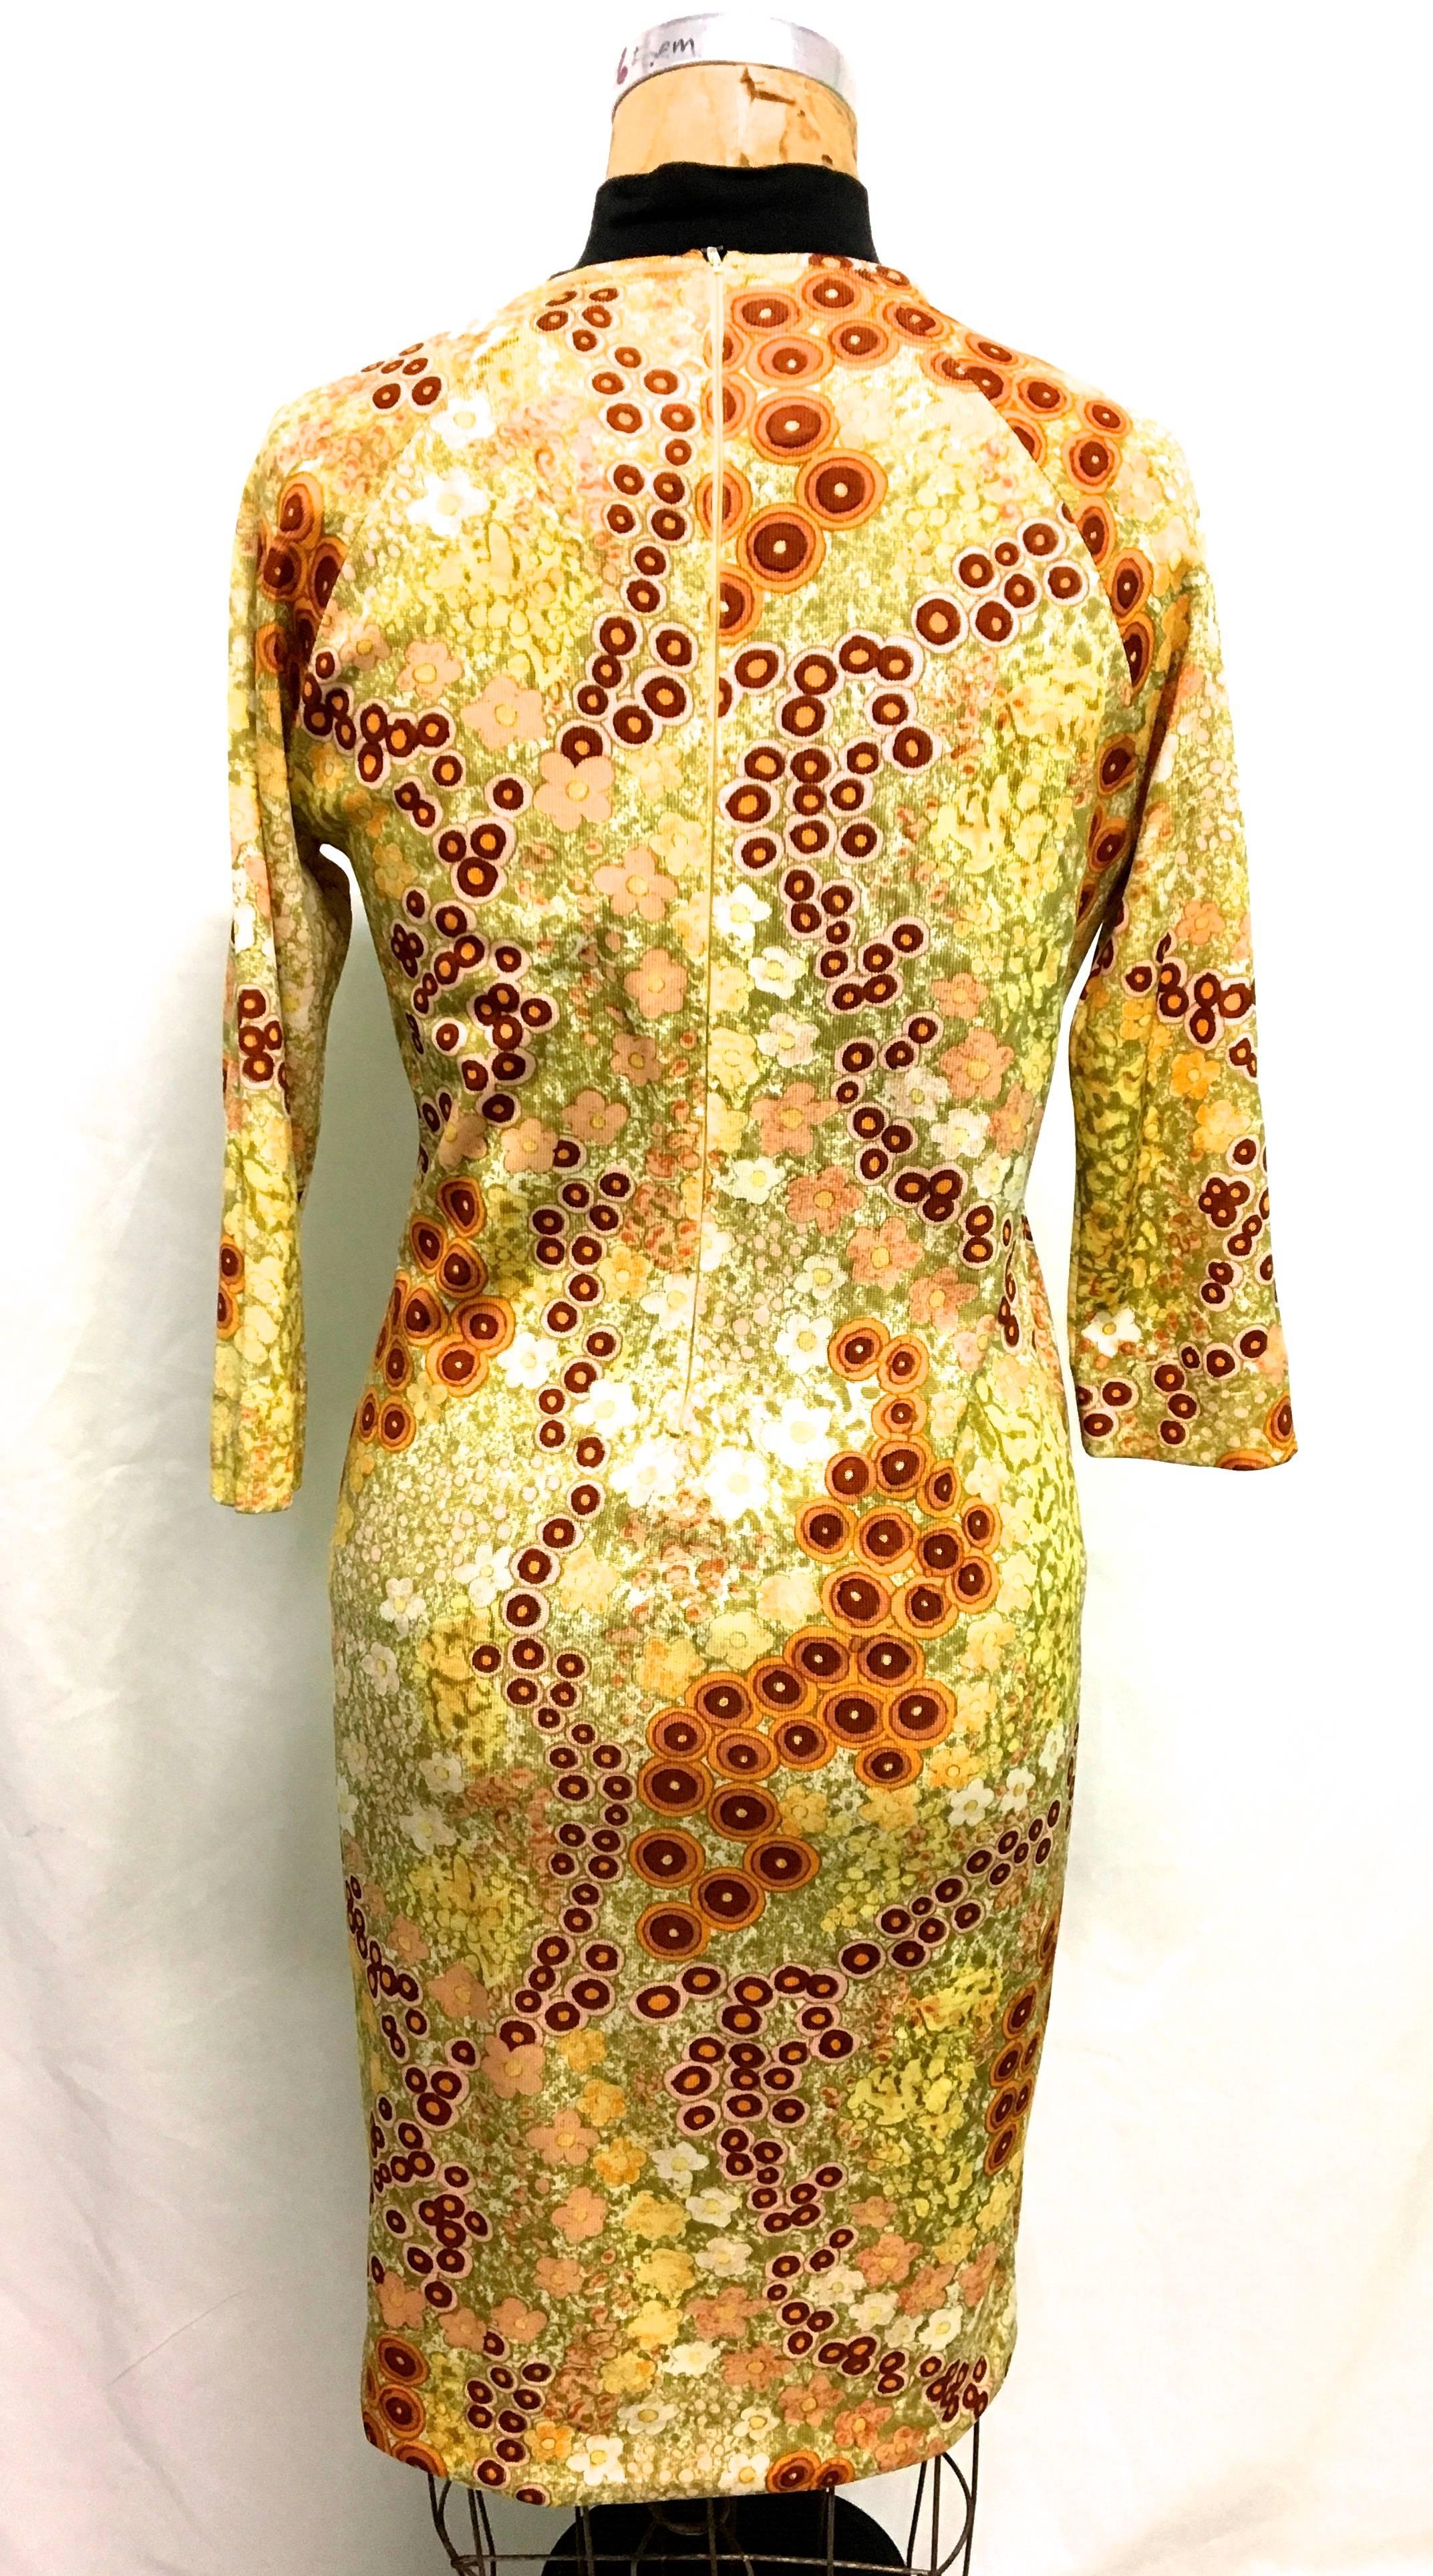 Presented here is a magnificent dress from Goldworm from the 1960's. This beautiful vintage dress is comprised of a floral design of yellows, browns, greens and tans. There is a fabric belt that wraps around the waist of the dress. The dress zips